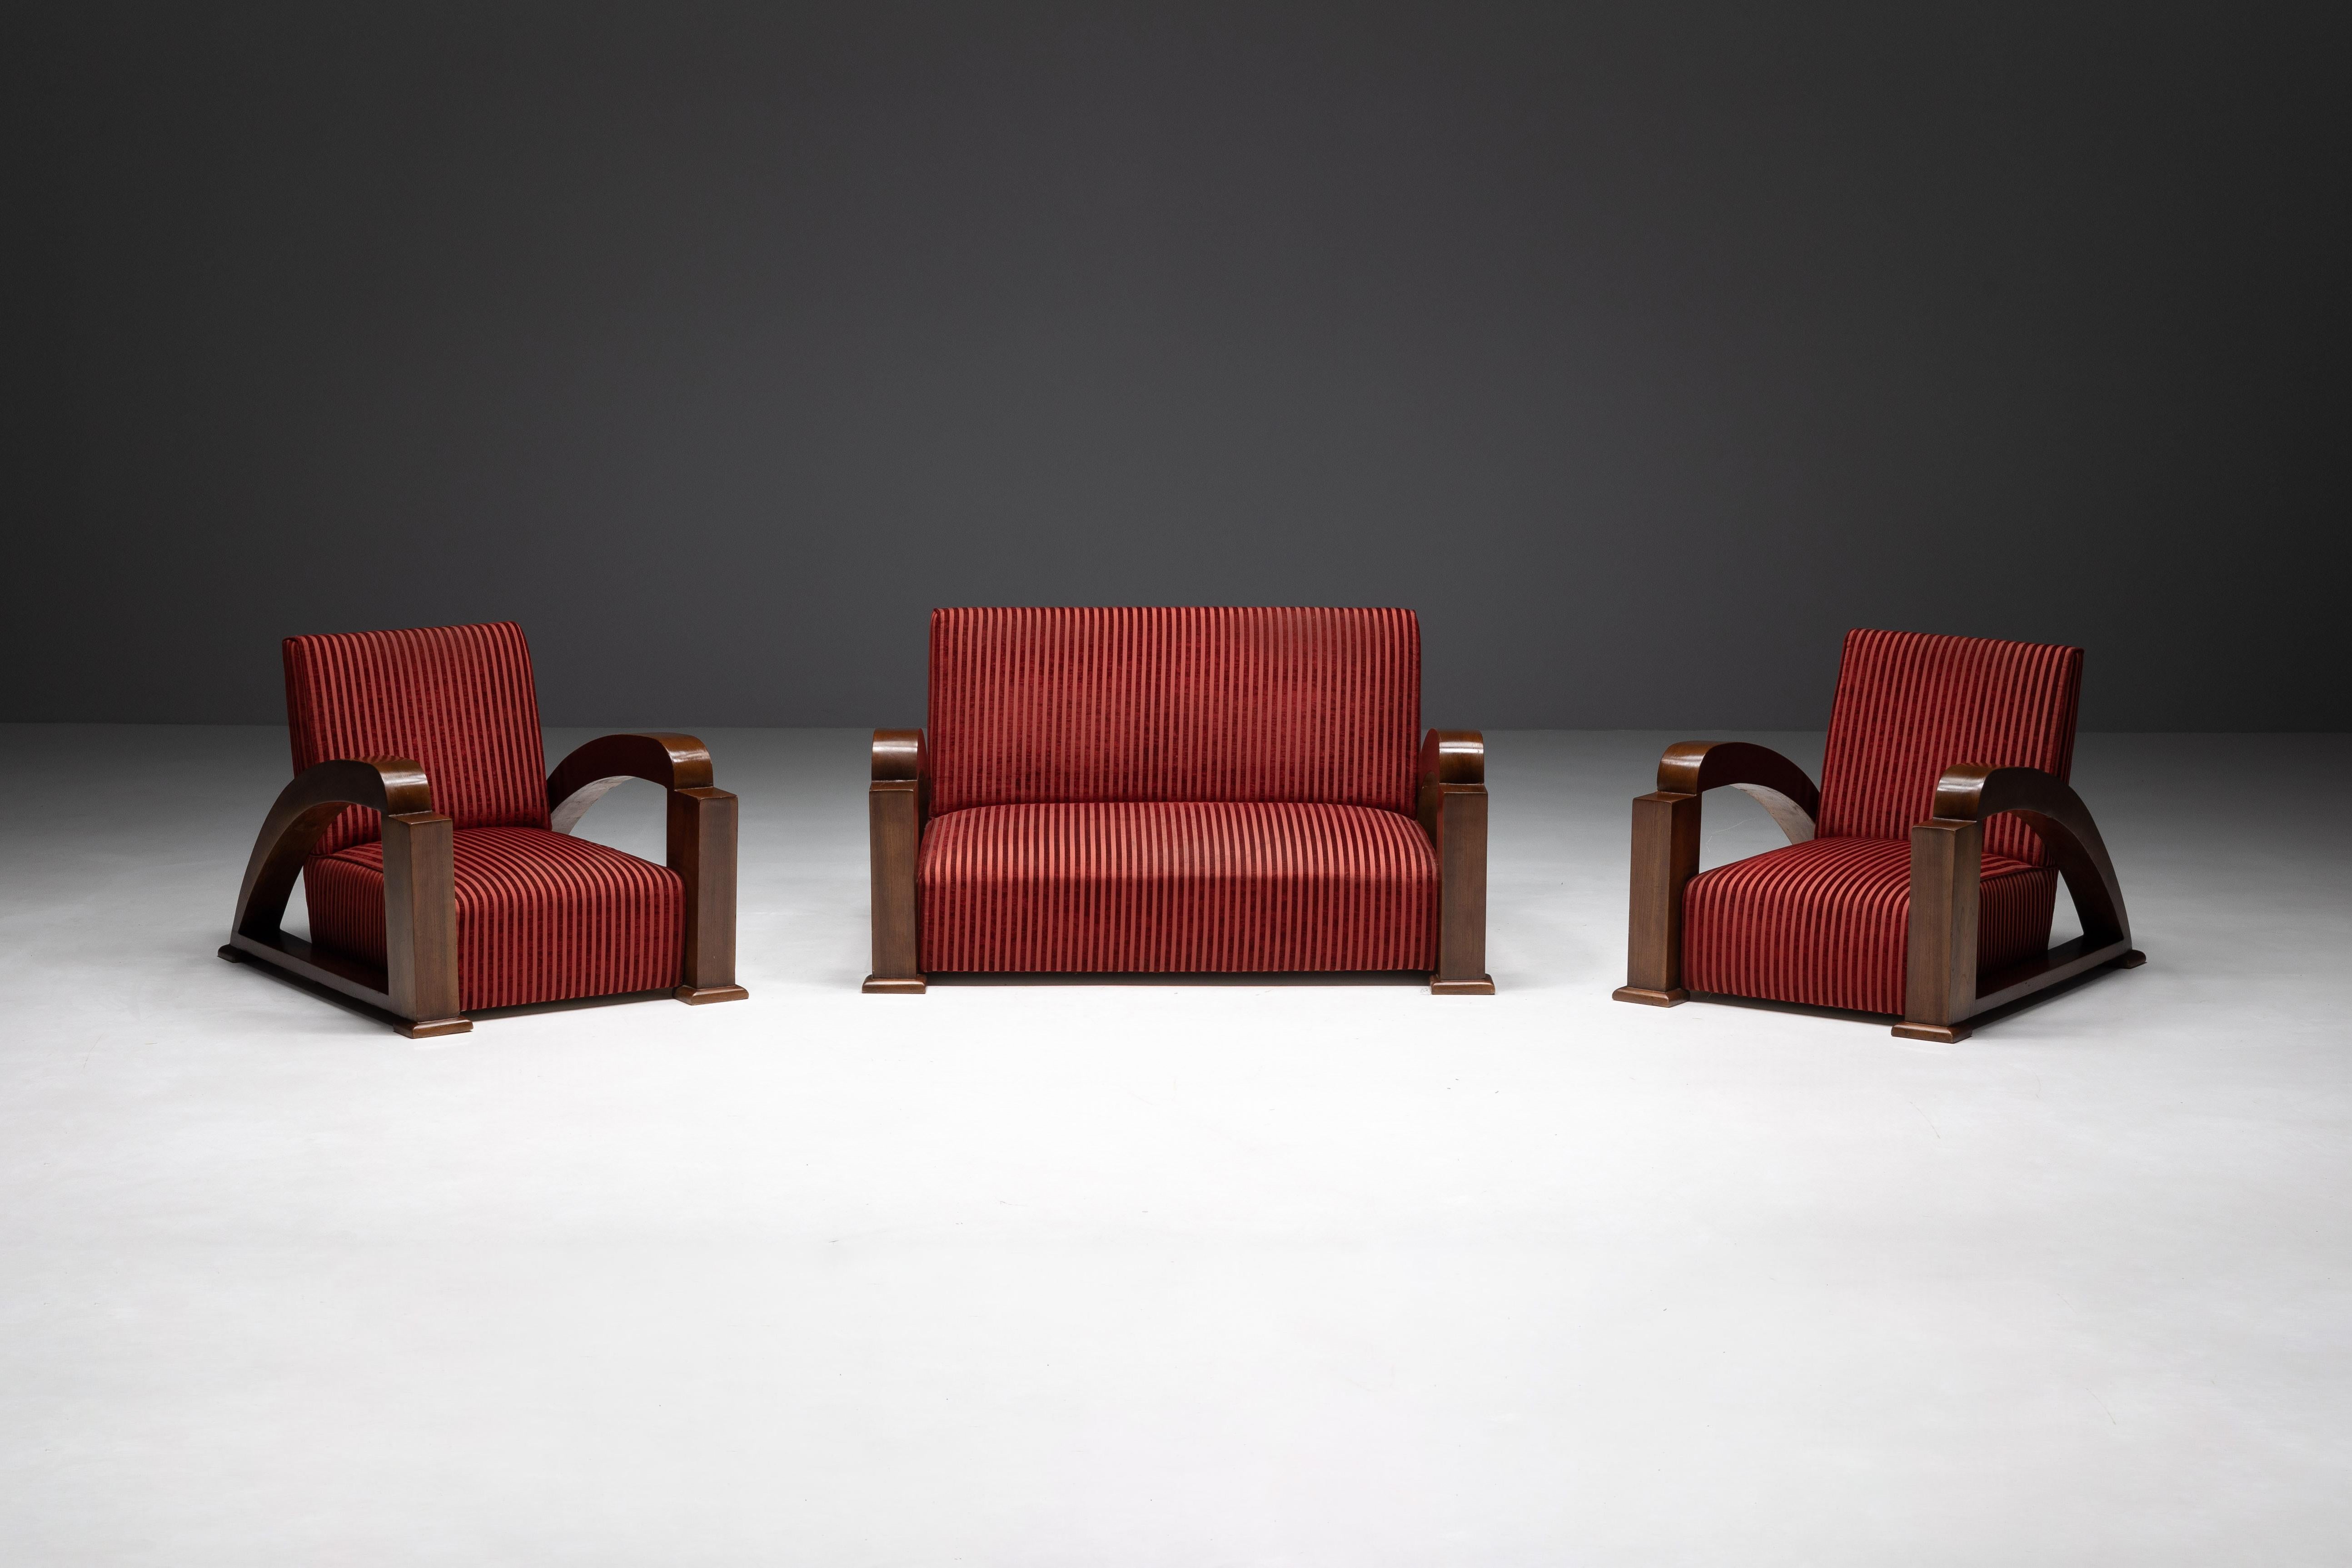 Art Deco Armchairs in Red Striped Velvet and with Swoosh Armrests, France, 1940s For Sale 10